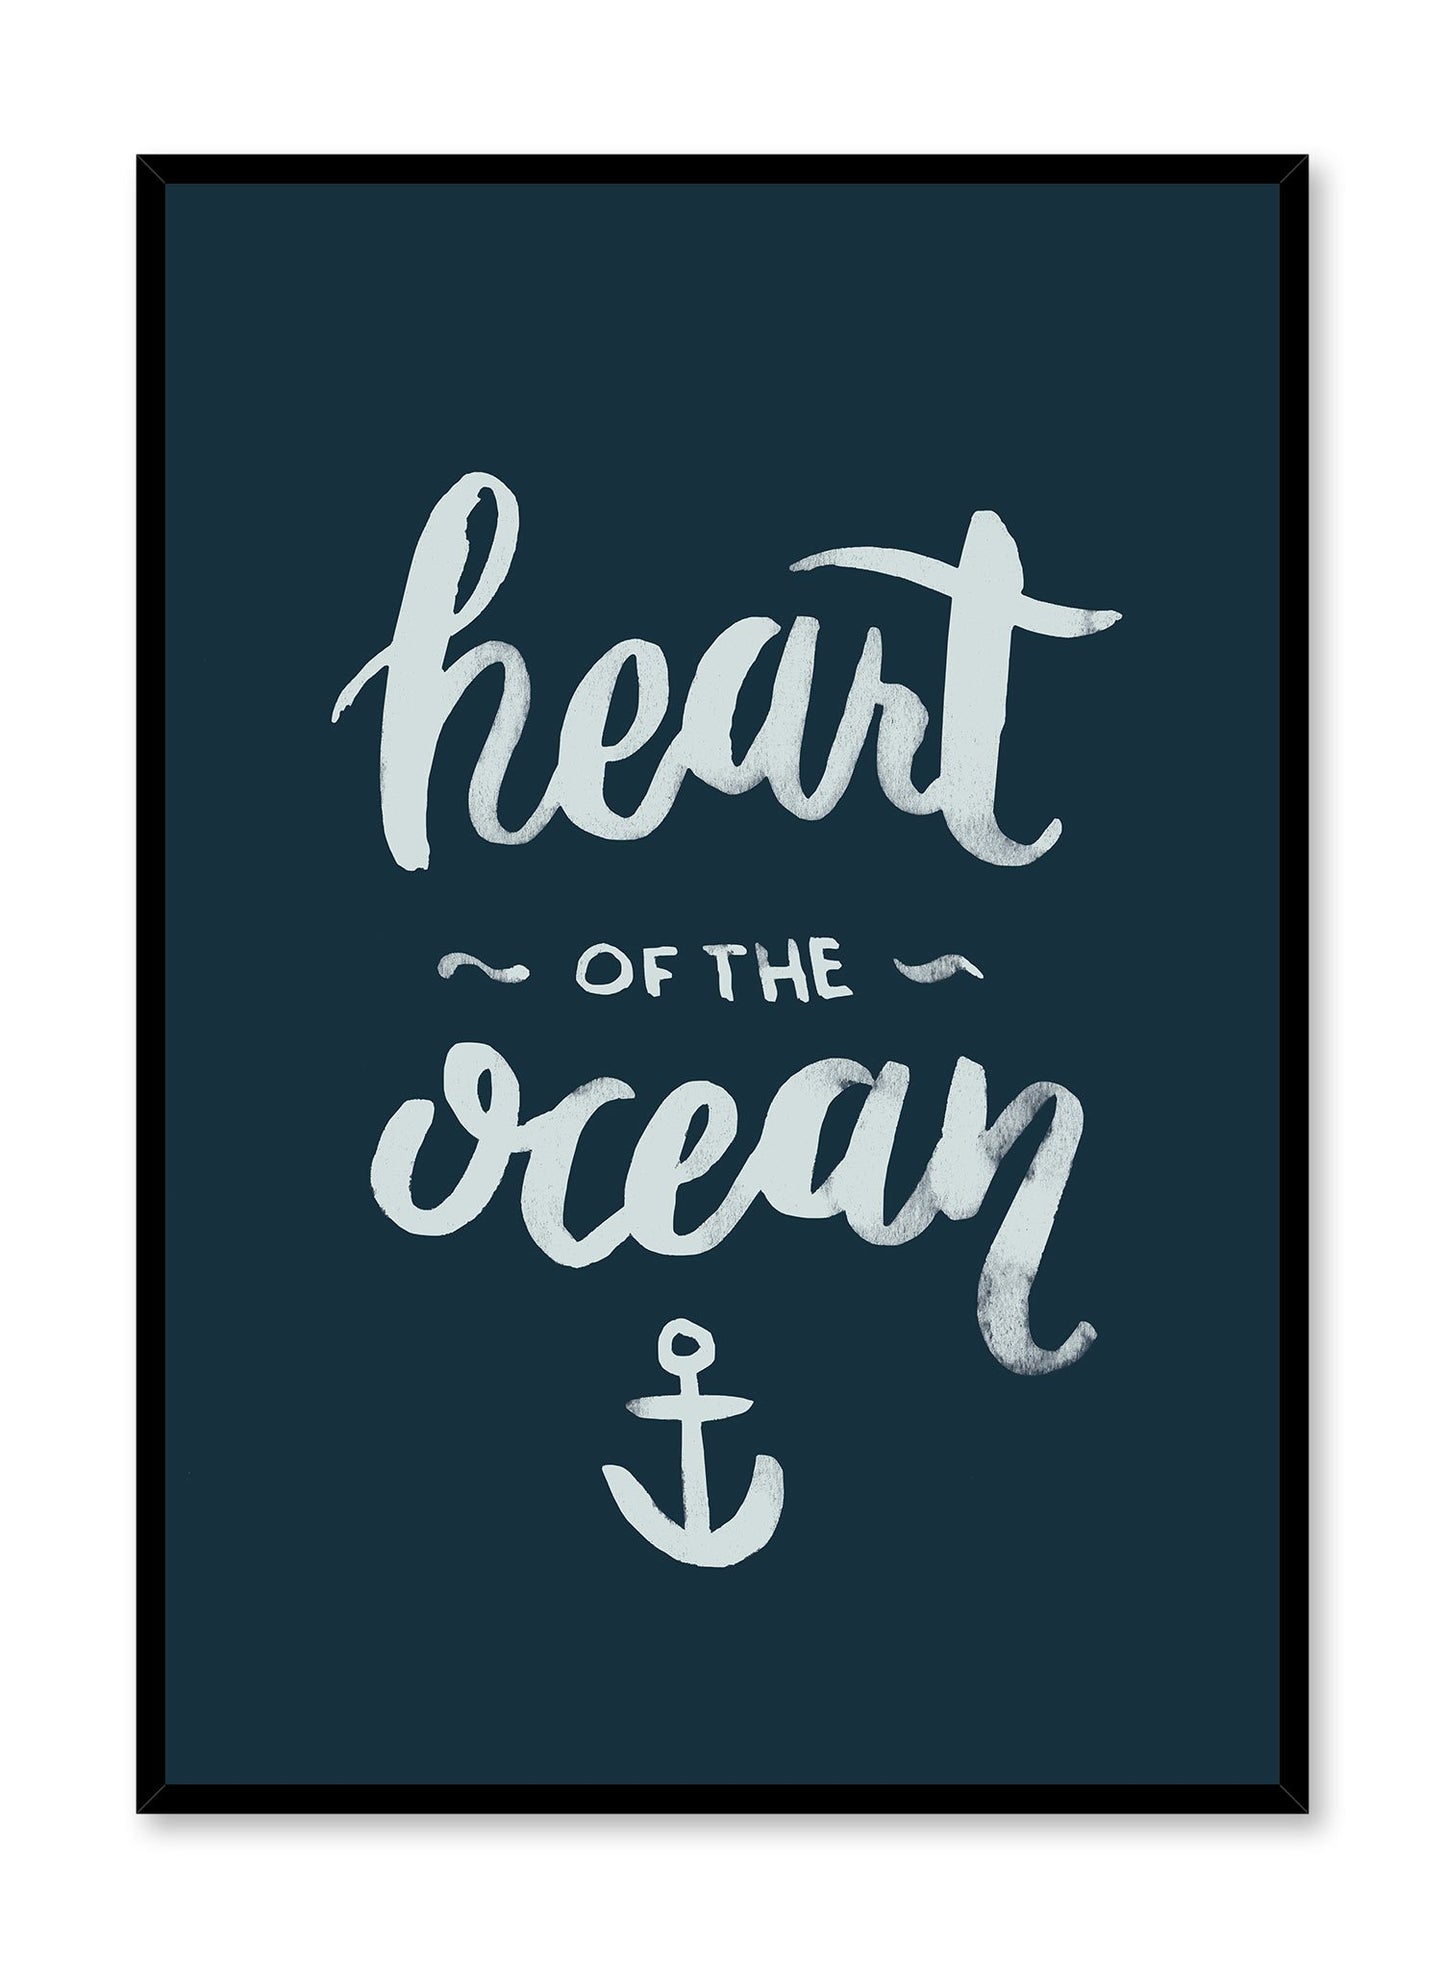 Heart of the Ocean is a minimalist illustration and typography of the words "heart of the ocean" written cursively with an anchor at the bottom.